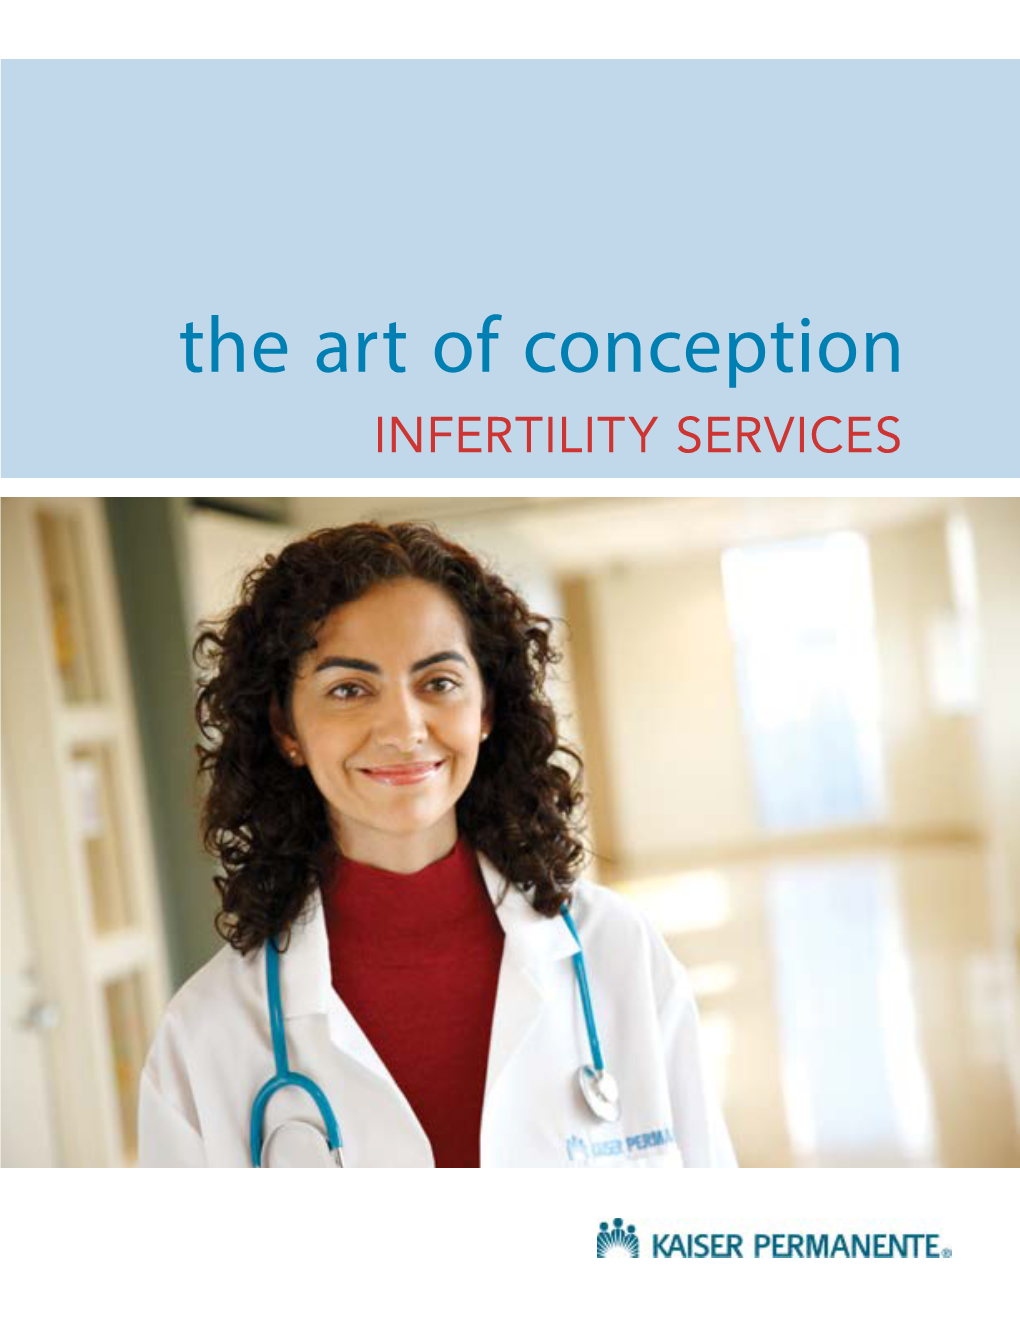 The Art of Conception INFERTILITY SERVICES the Art of Conception